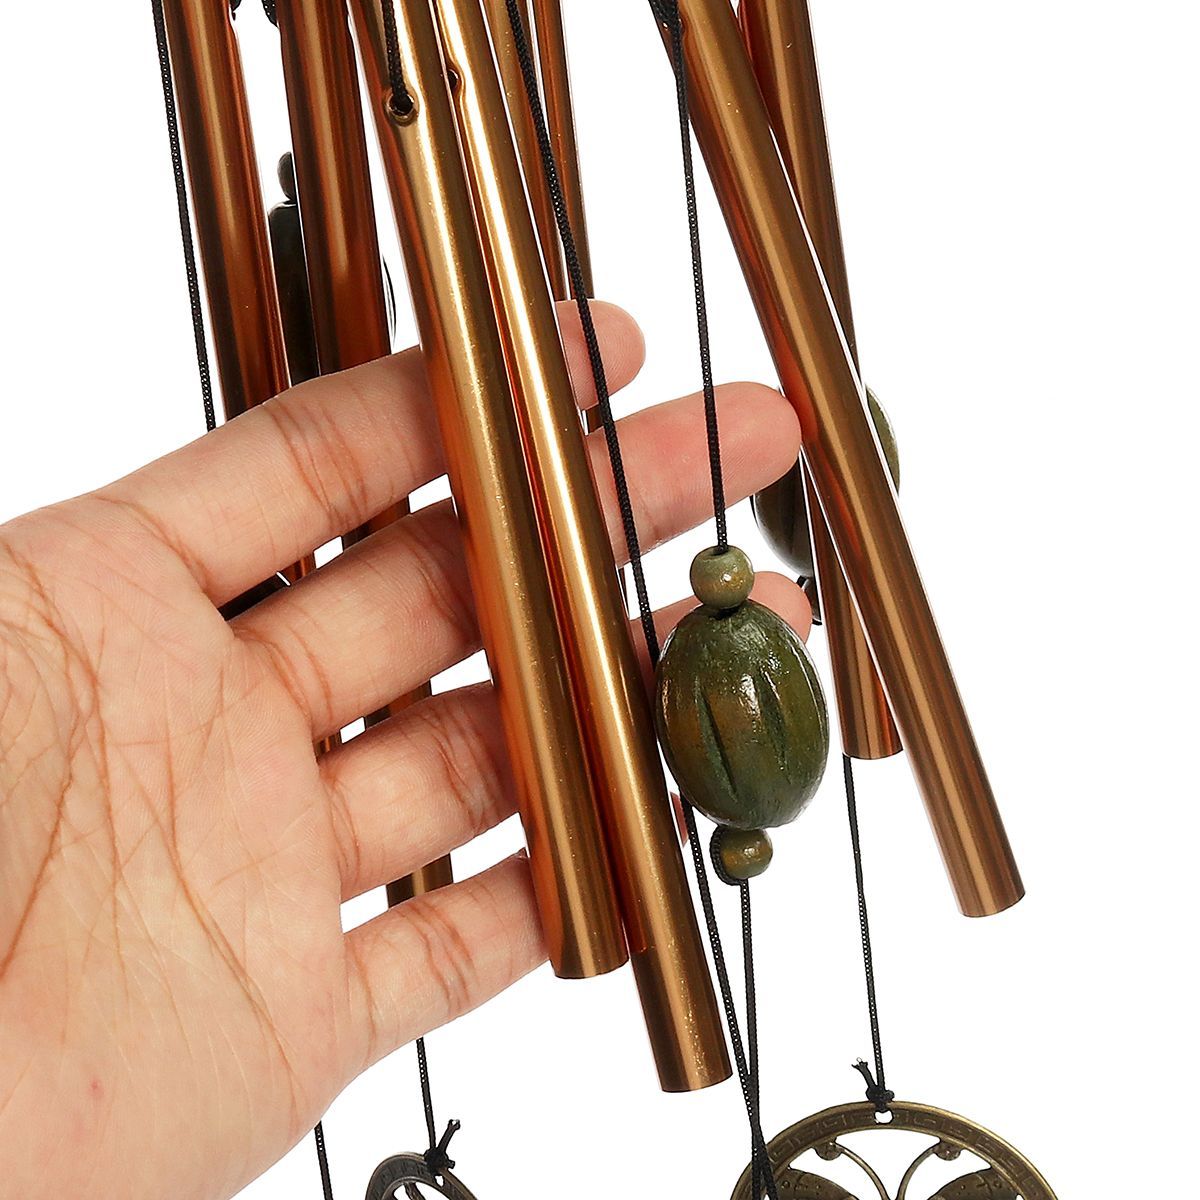 Large-Wind-Chimes-Bells-Copper-Outdoor-Yard-Garden-Home-Decor-Ornament-1684480